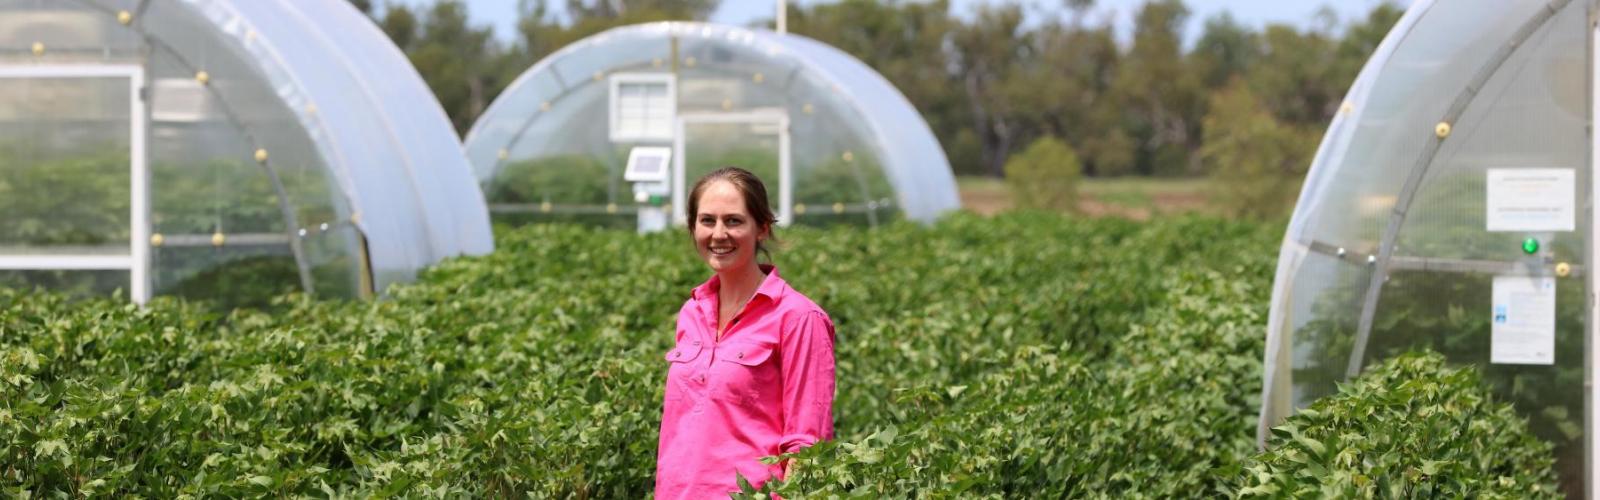 Cotton researcher standing in a cotton trial paddock in front of glasshouses.